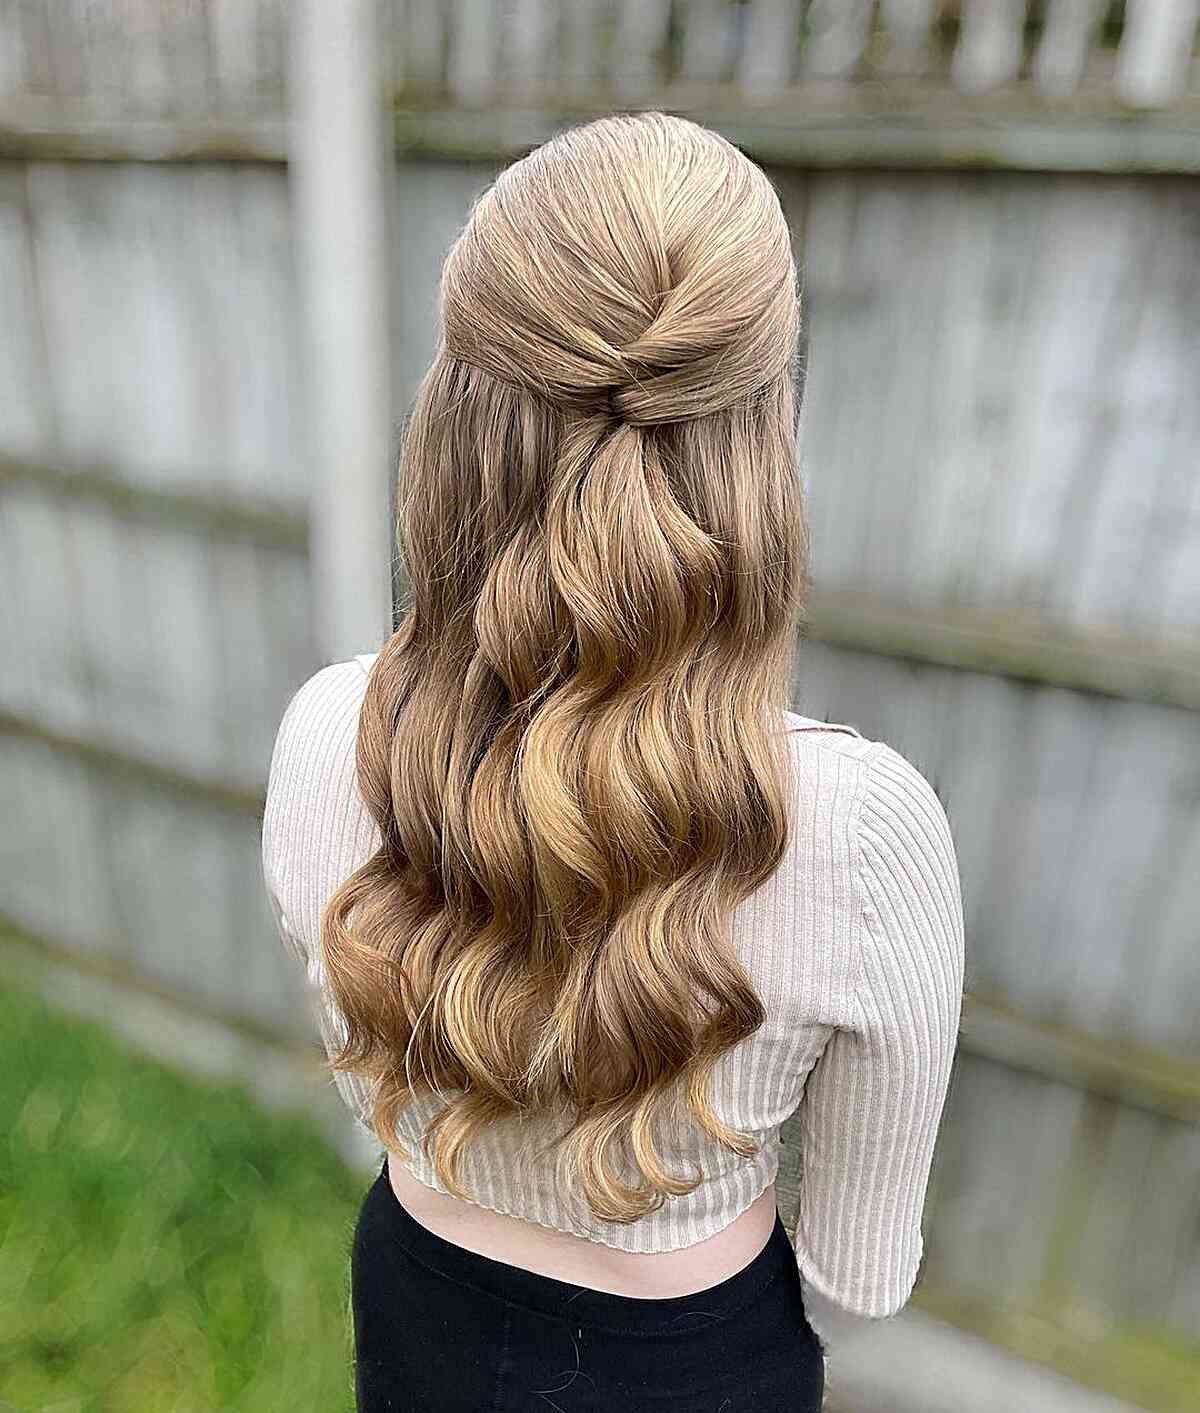 Blonde Half-Up Hair with Loose Waves for Prom Night